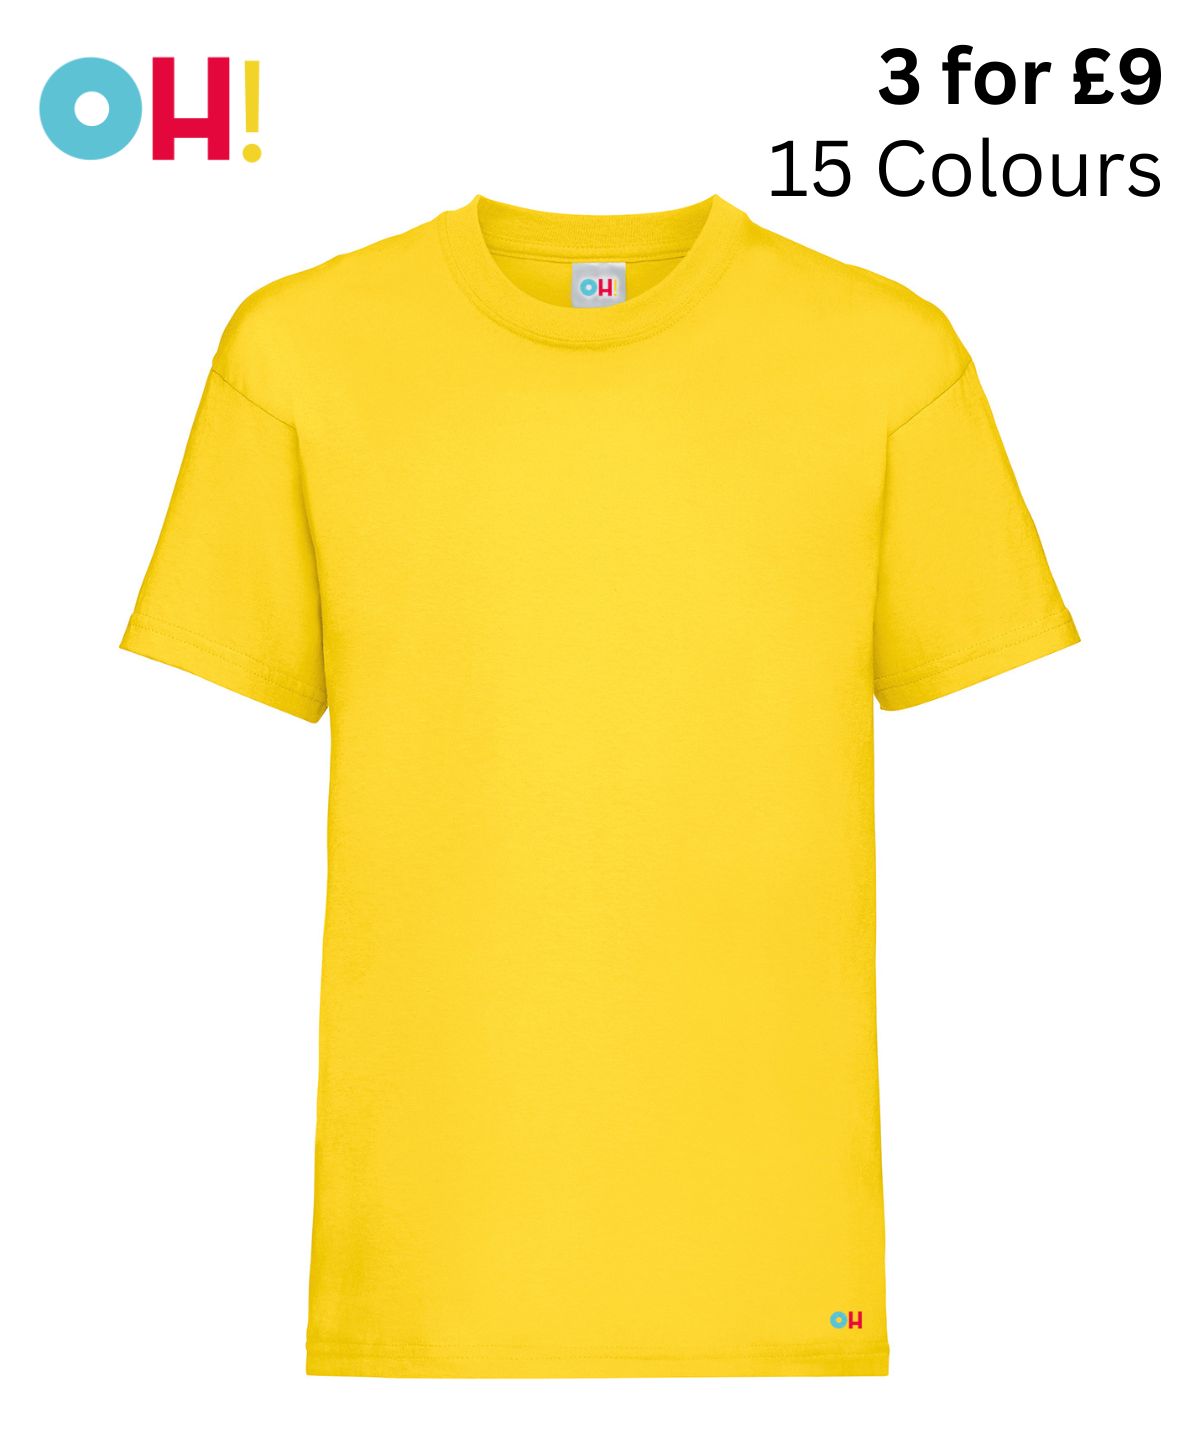 OH! Dorothy Basic T Shirt - 15 Colours / 1 to 15 Years